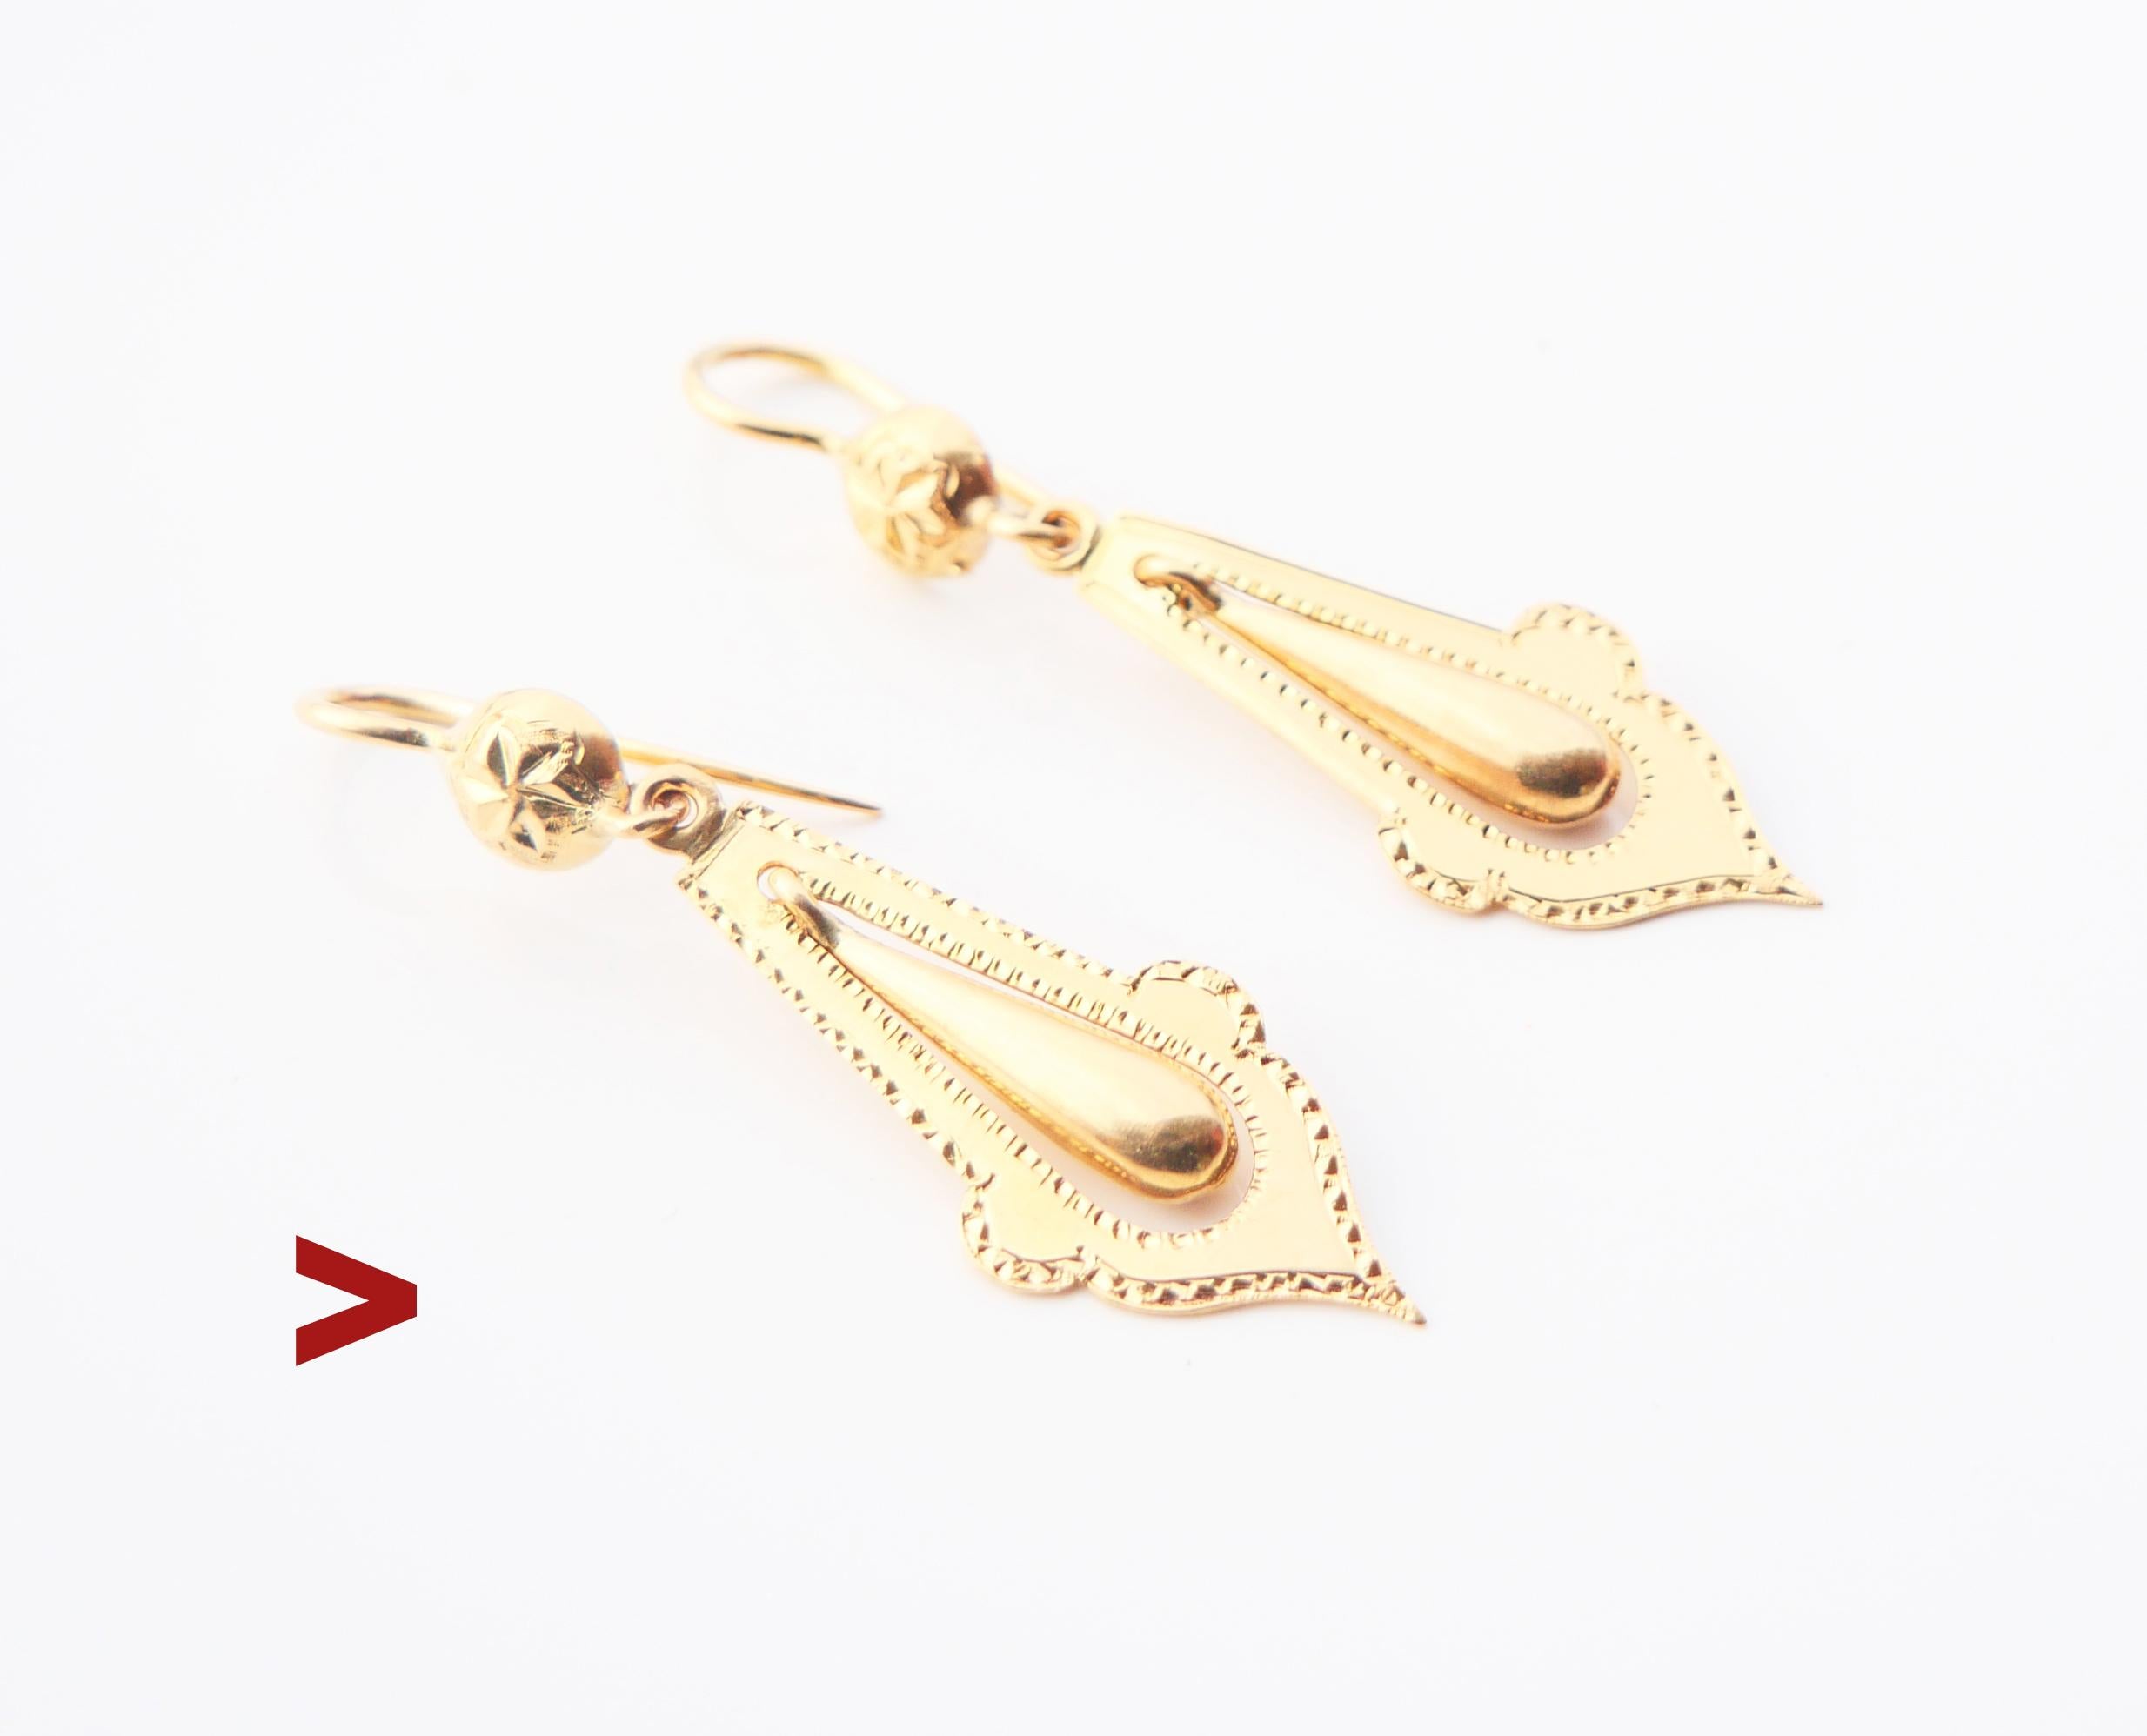 A pair of antique earrings with drop-shaped pendants and delicate engraved ornaments.

Freely suspended inner dangles are hollow inside.

Swedish hallmarks on both marked 18K Gold.

Maker's marks unknown to me, city of Stockholm. Date marks A6 =